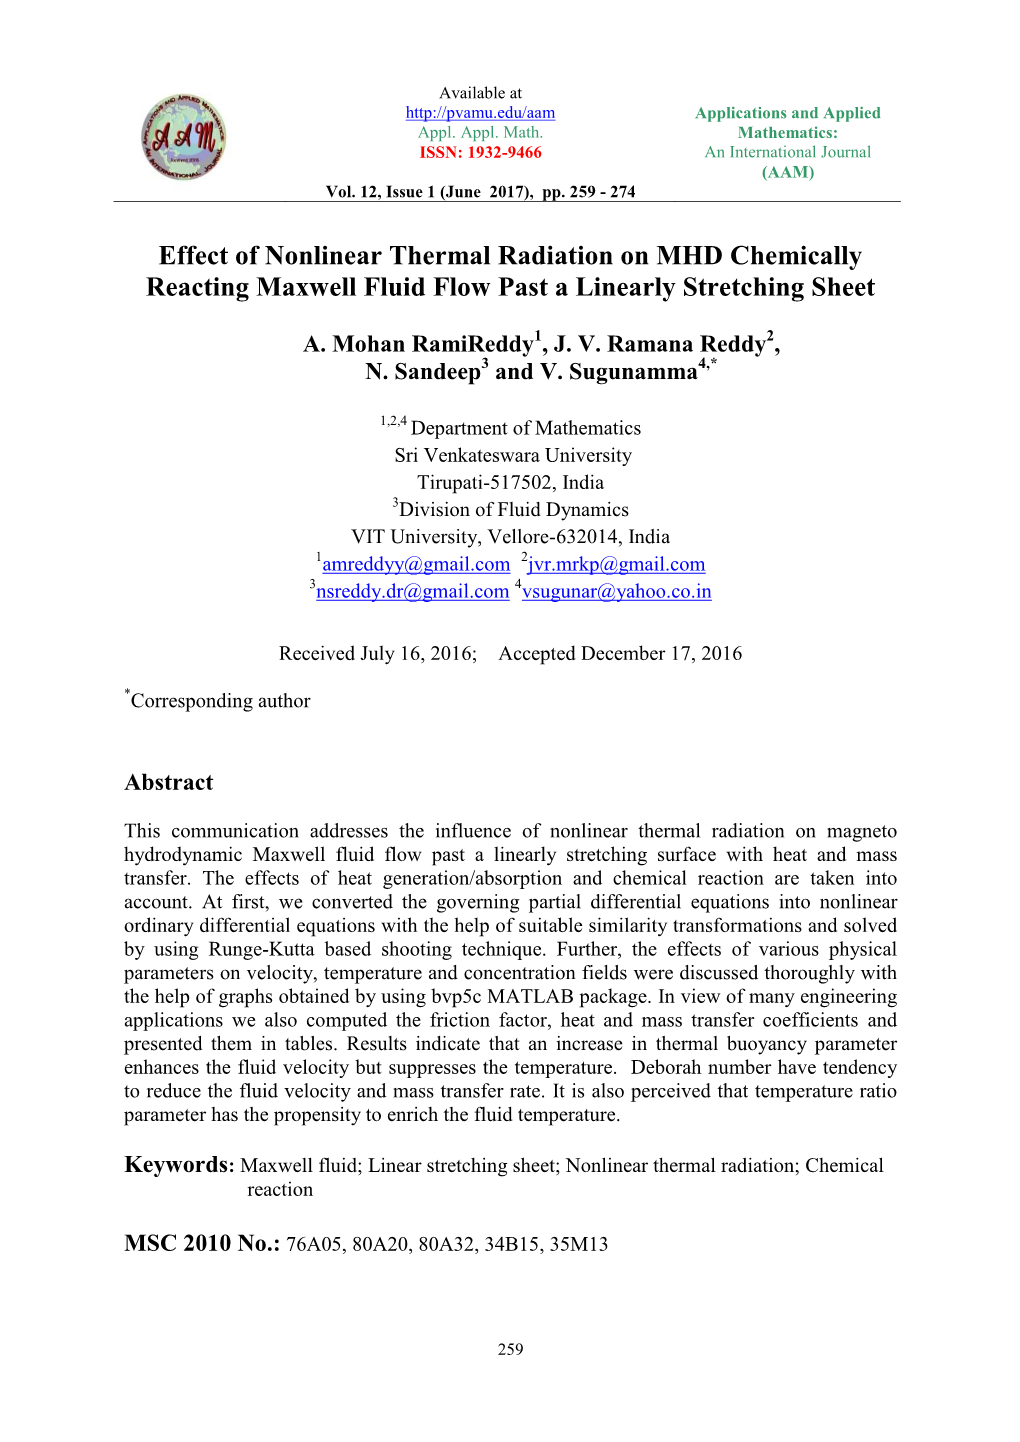 Effect of Nonlinear Thermal Radiation on MHD Chemically Reacting Maxwell Fluid Flow Past a Linearly Stretching Sheet